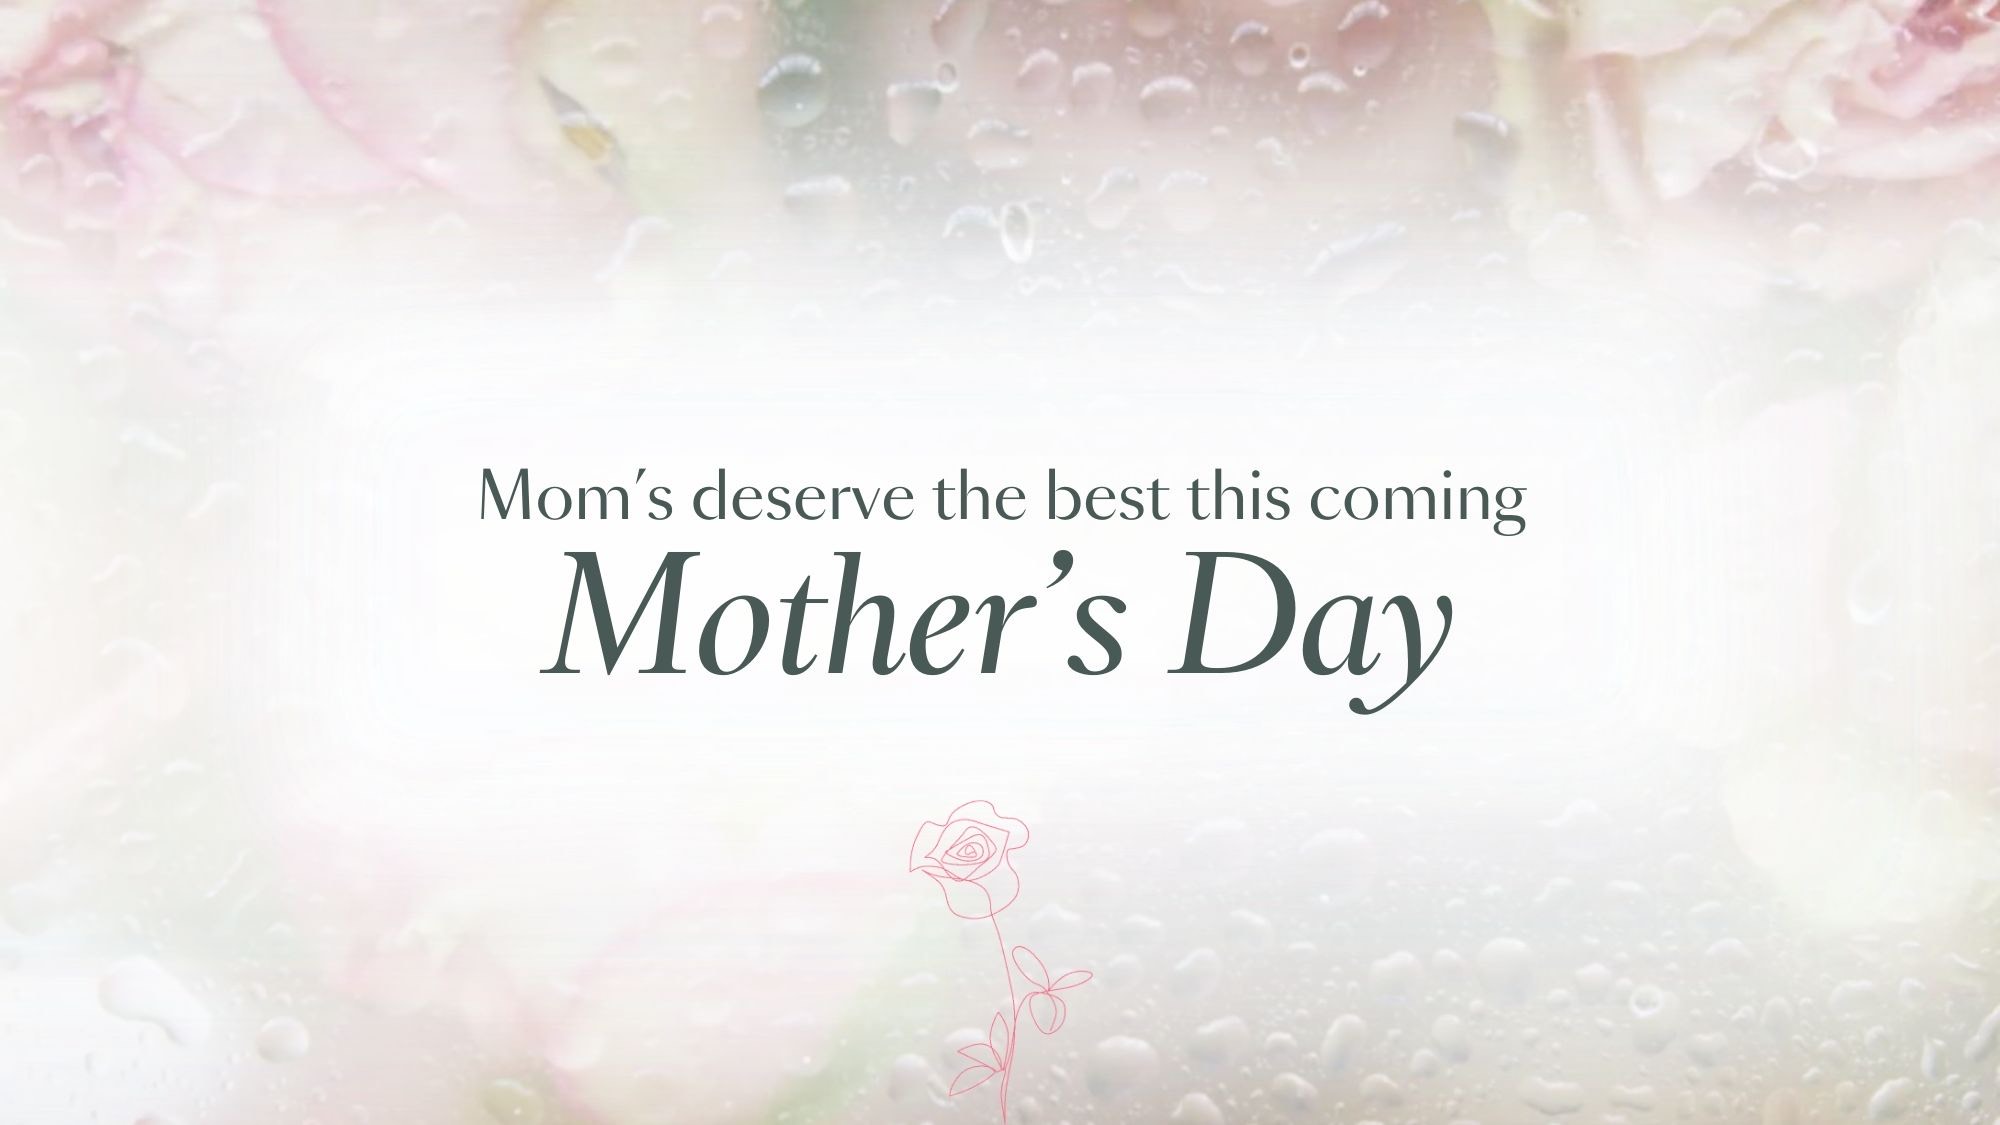 Luxurious Treatments for Moms at Luminisce